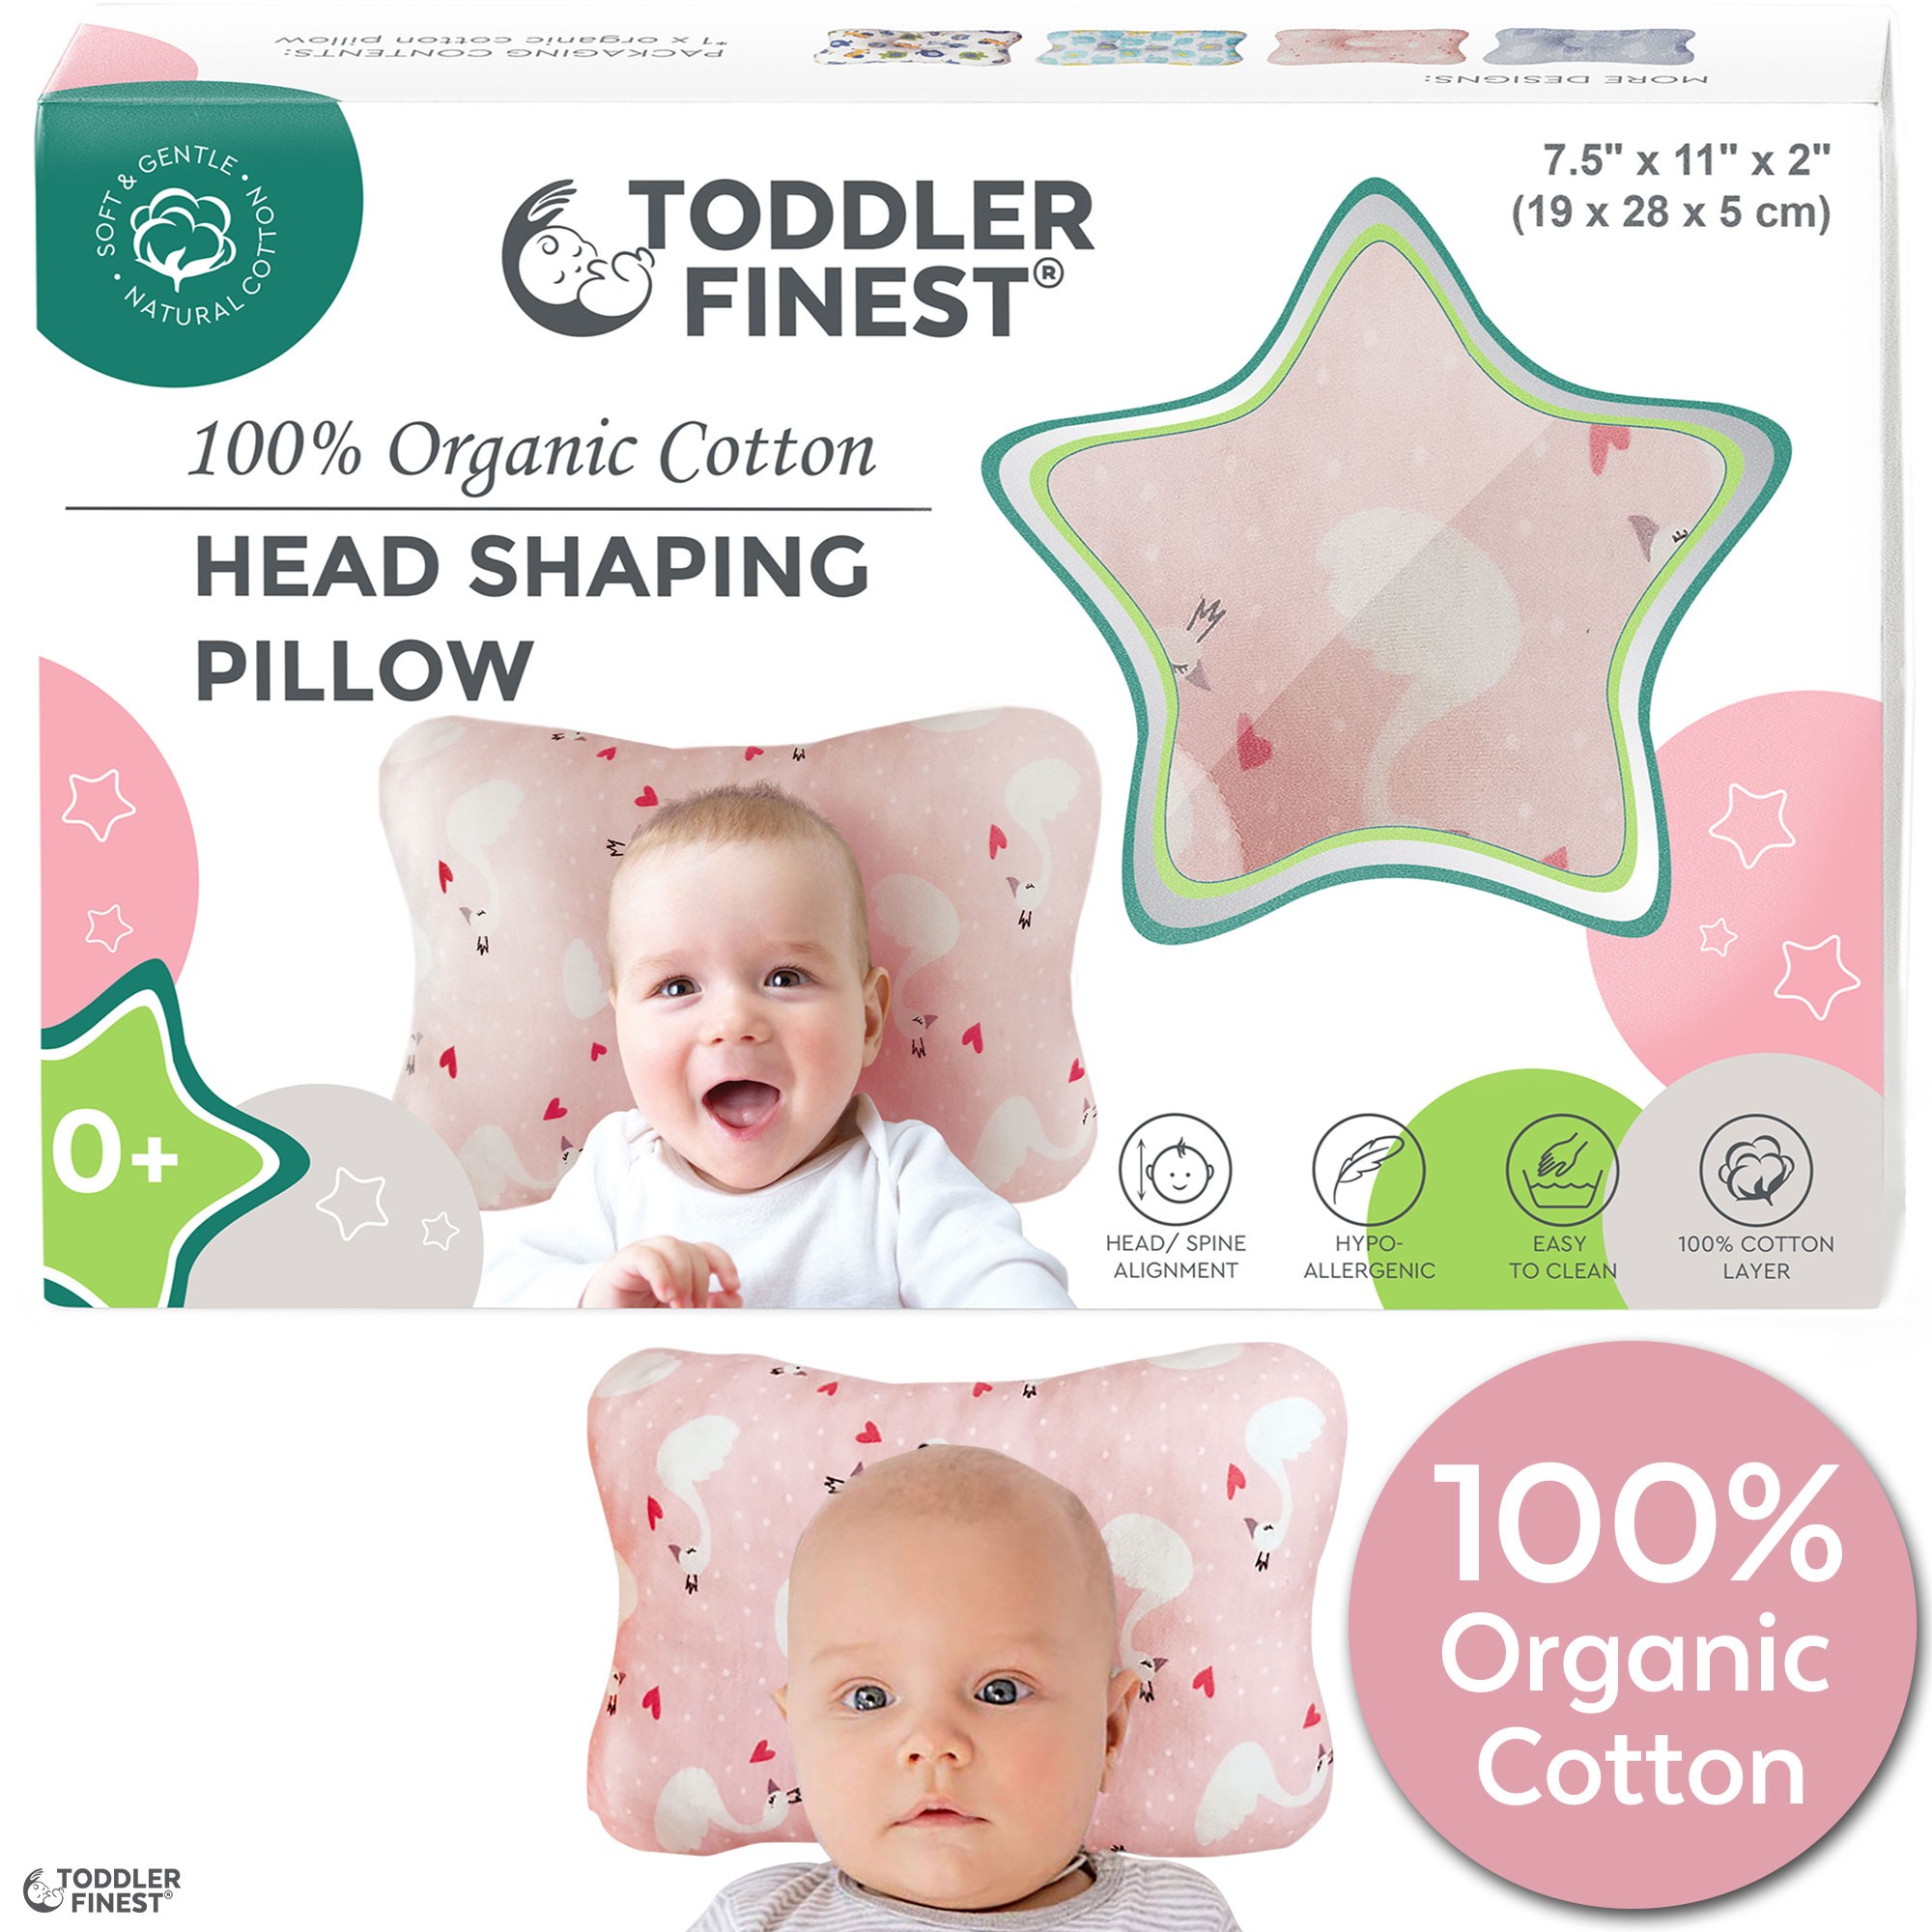 Premium Baby Anti Flat Head Pillows for Sleeping Support Baby Head Shaping Pillow/Baby Sleep Positioner for Neck Organic Baby Pillow with Infant Pillow Cover and Security Blanket for Newborn 